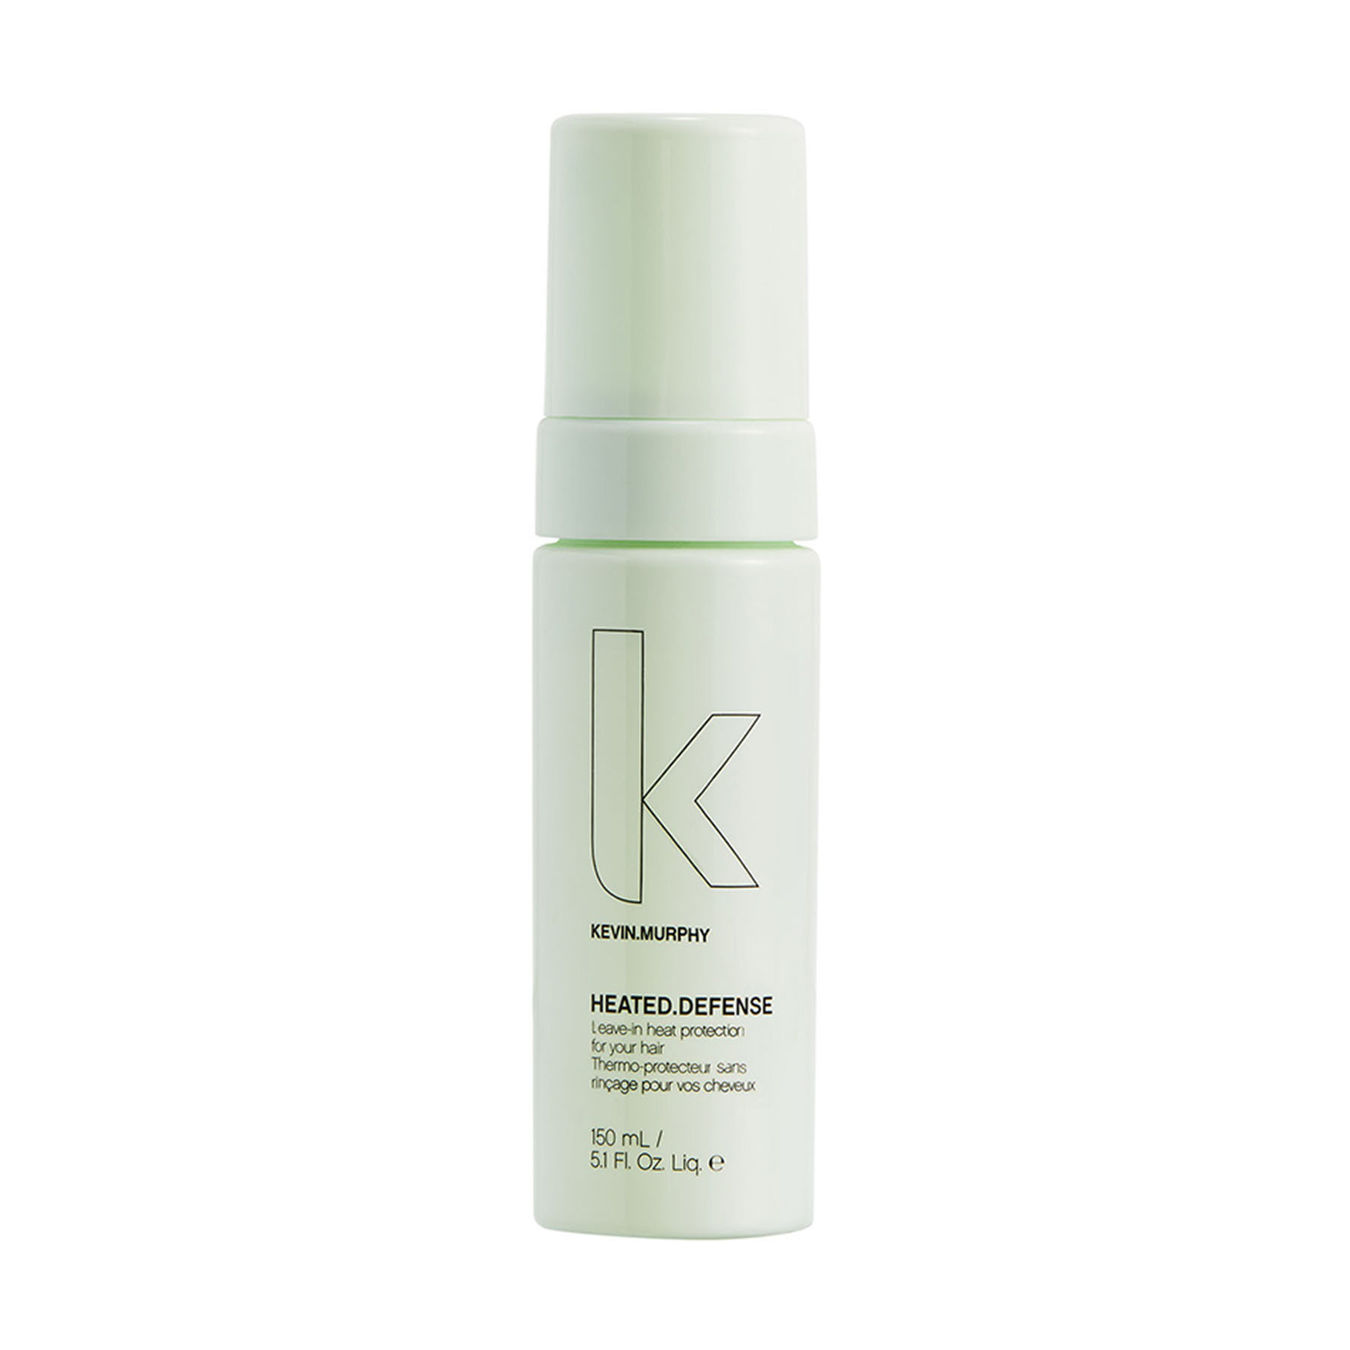 KEVIN.MURPHY Heated.Defense Leave-in heat protection for your hair von Kevin.murphy